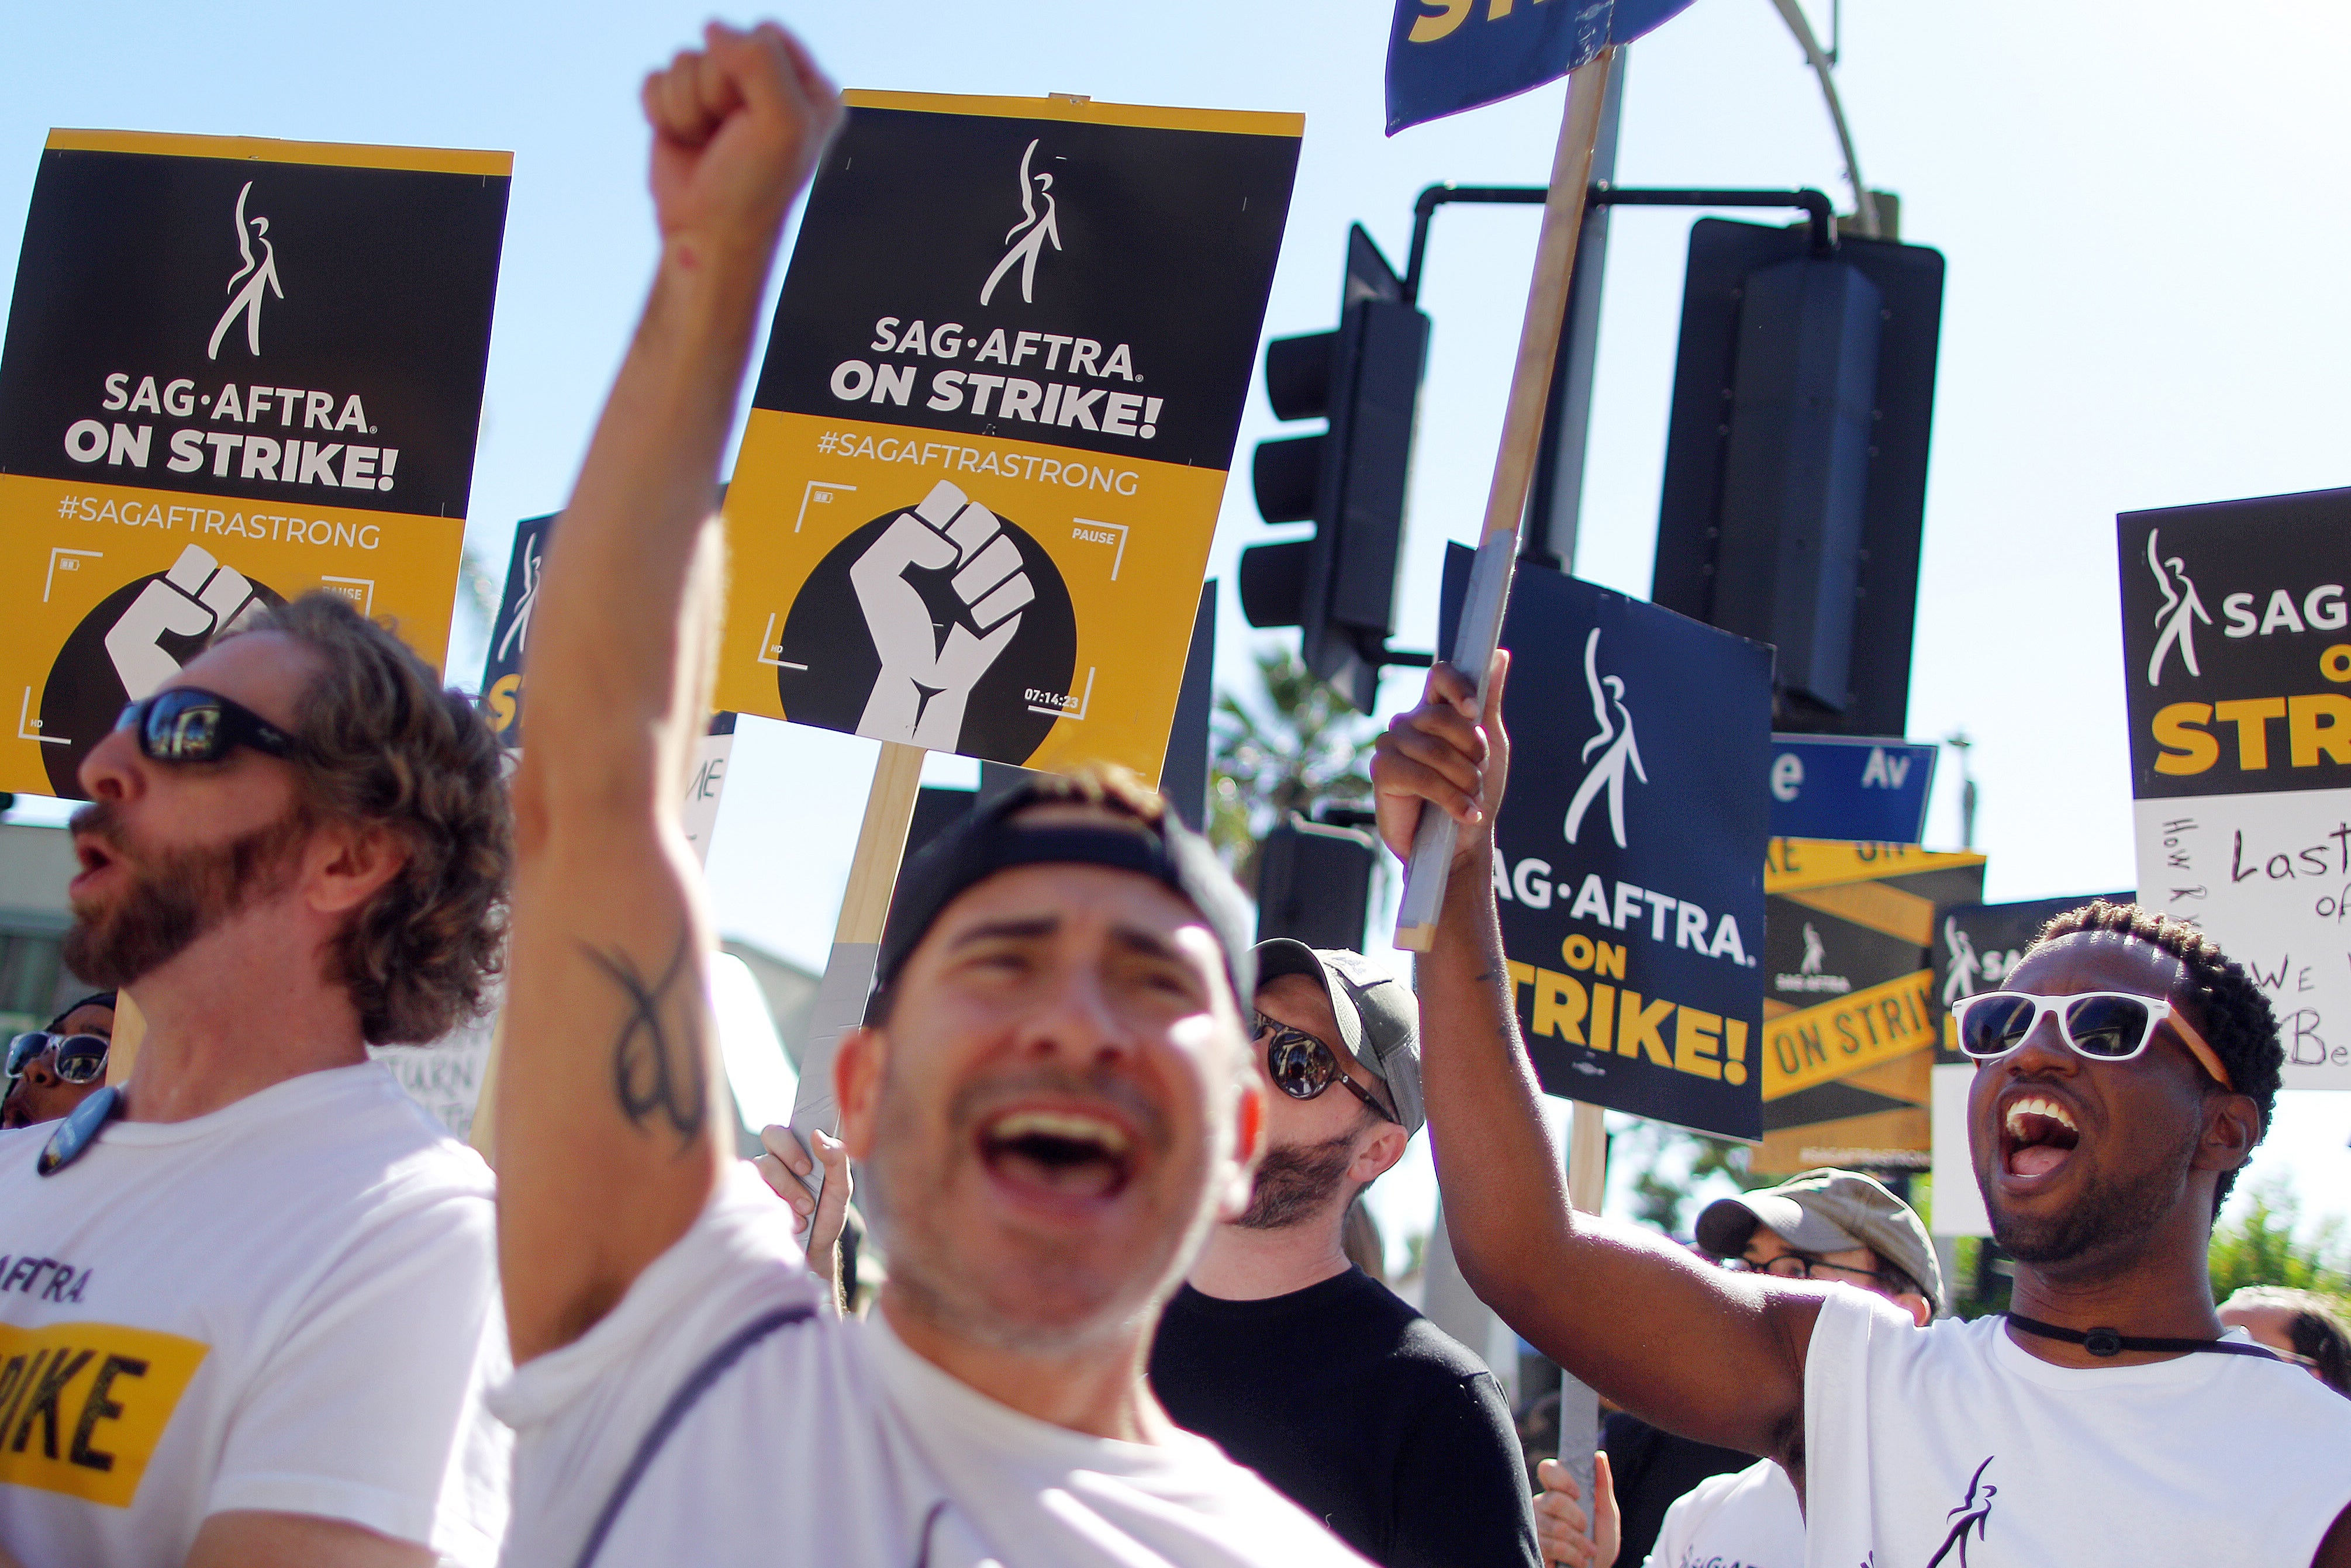 Union power: Picketers chant outside Paramount Studios on day 118 of the Sag-Aftra strike